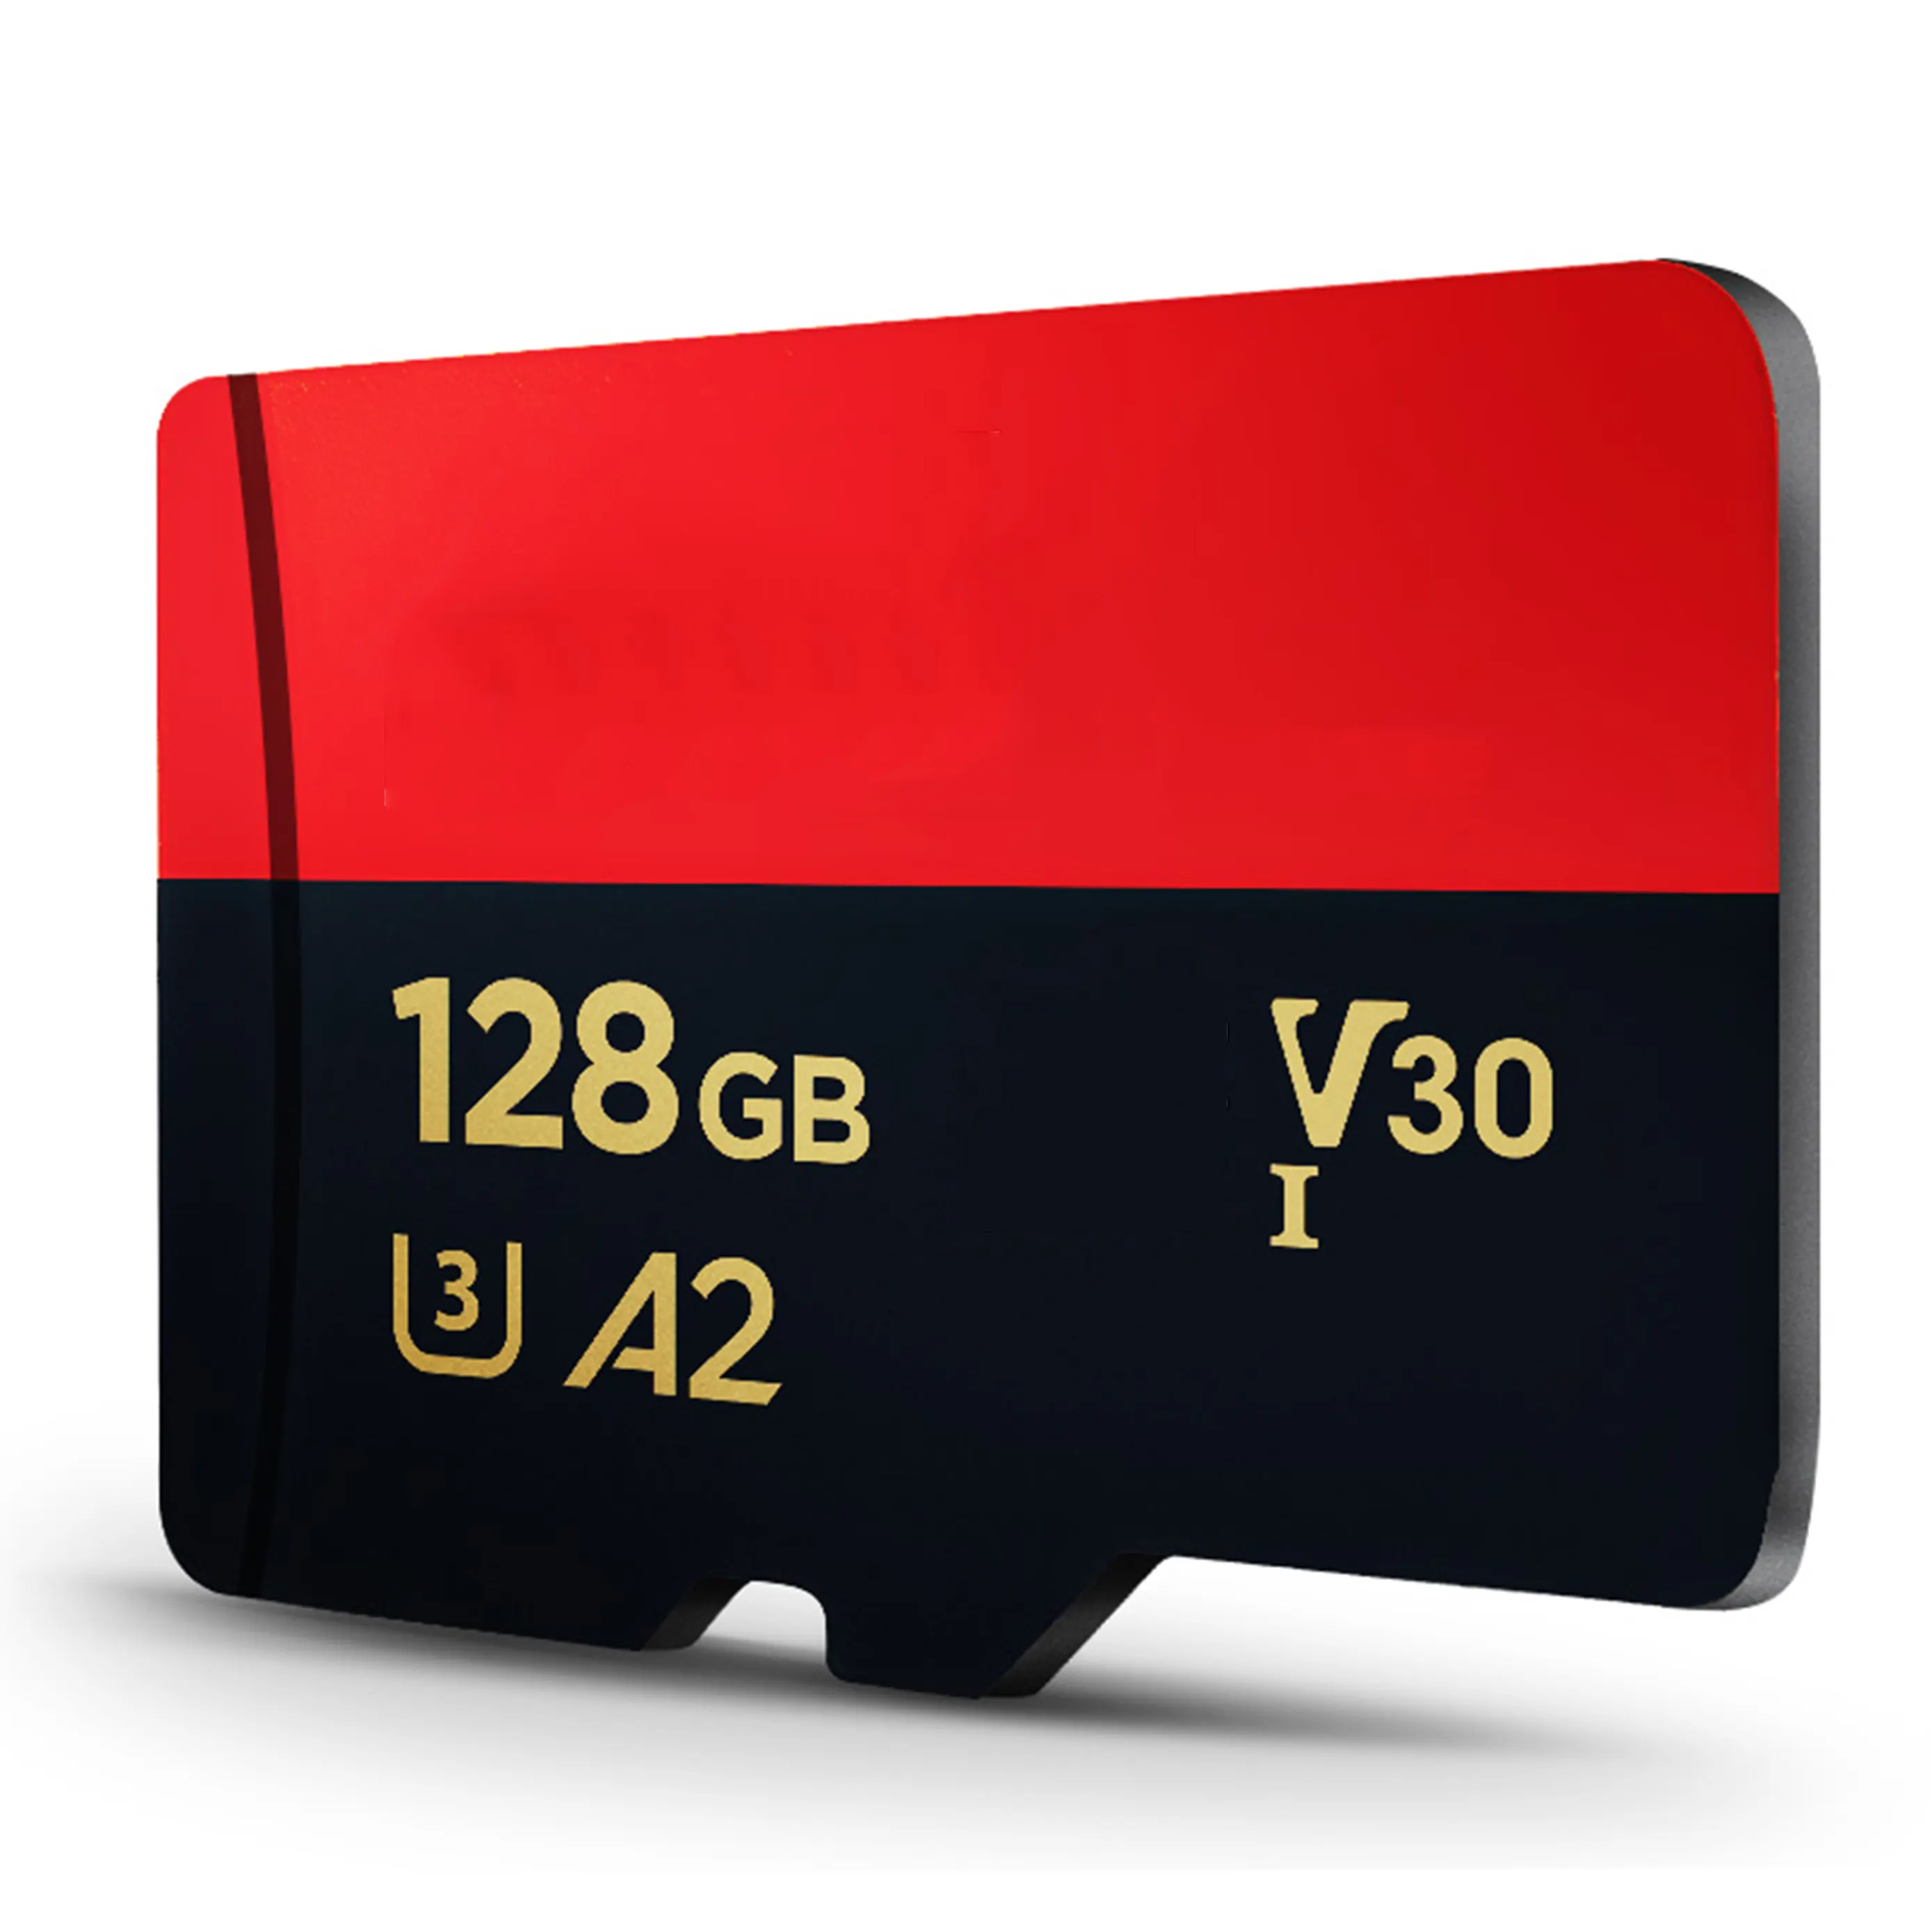 Original 4gb 8gb 16gb 32gb 64gb 128gb 256gb 512gb 1tb 4 8 16 32 64 128 256 512 Gb 1tb Sd Tf Flash Memory Cards For Mobile Phone